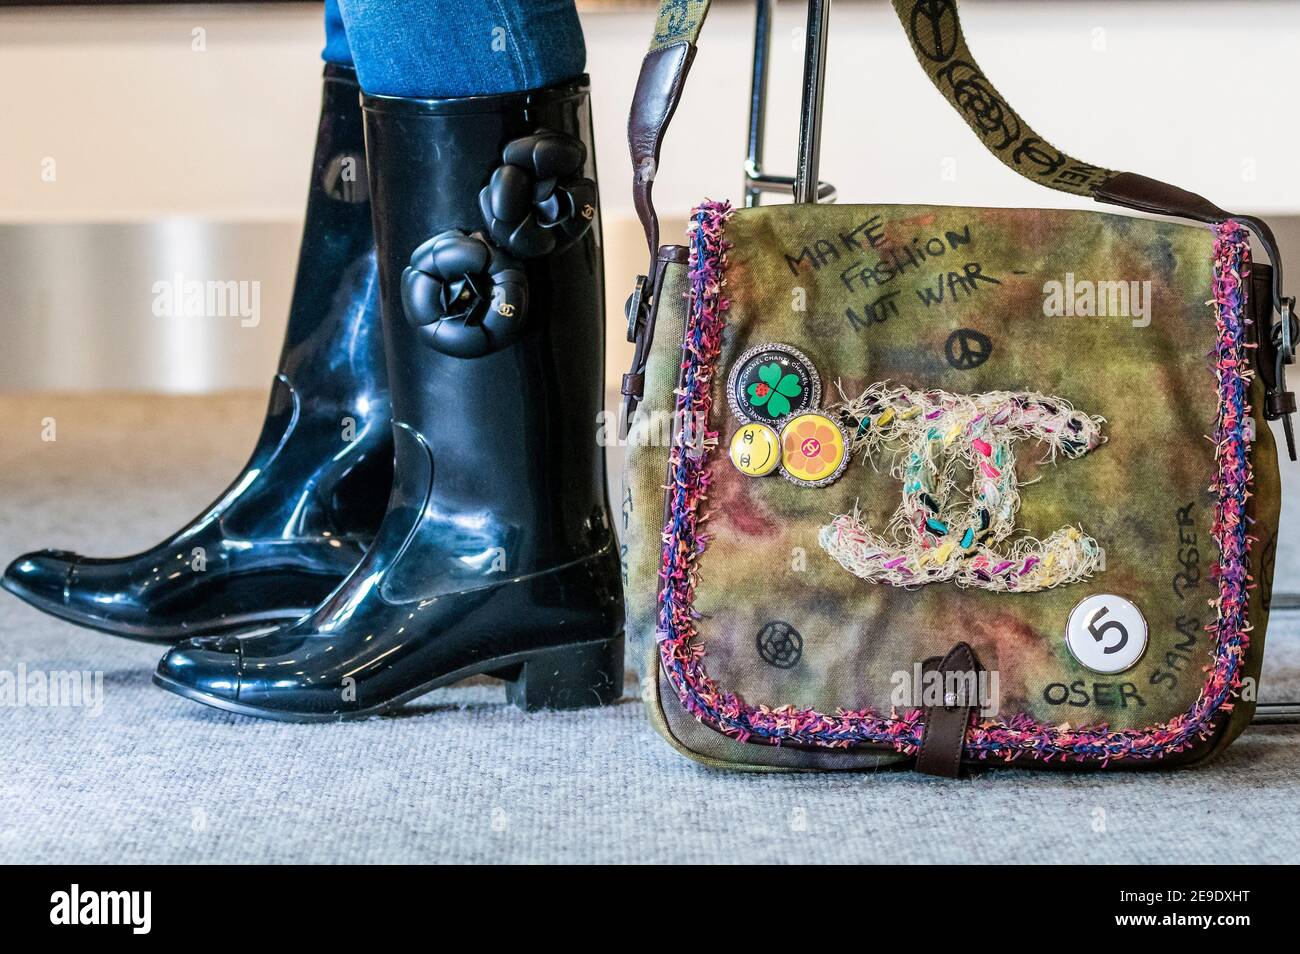 London, UK. 4 Feb 2021. Designer Wellington Boots by Chanel with Camellia  design (part of a set of 2 pairs) est £200-300 with a Graffiti On The  Pavements Messenger Bag, Spring 2015,